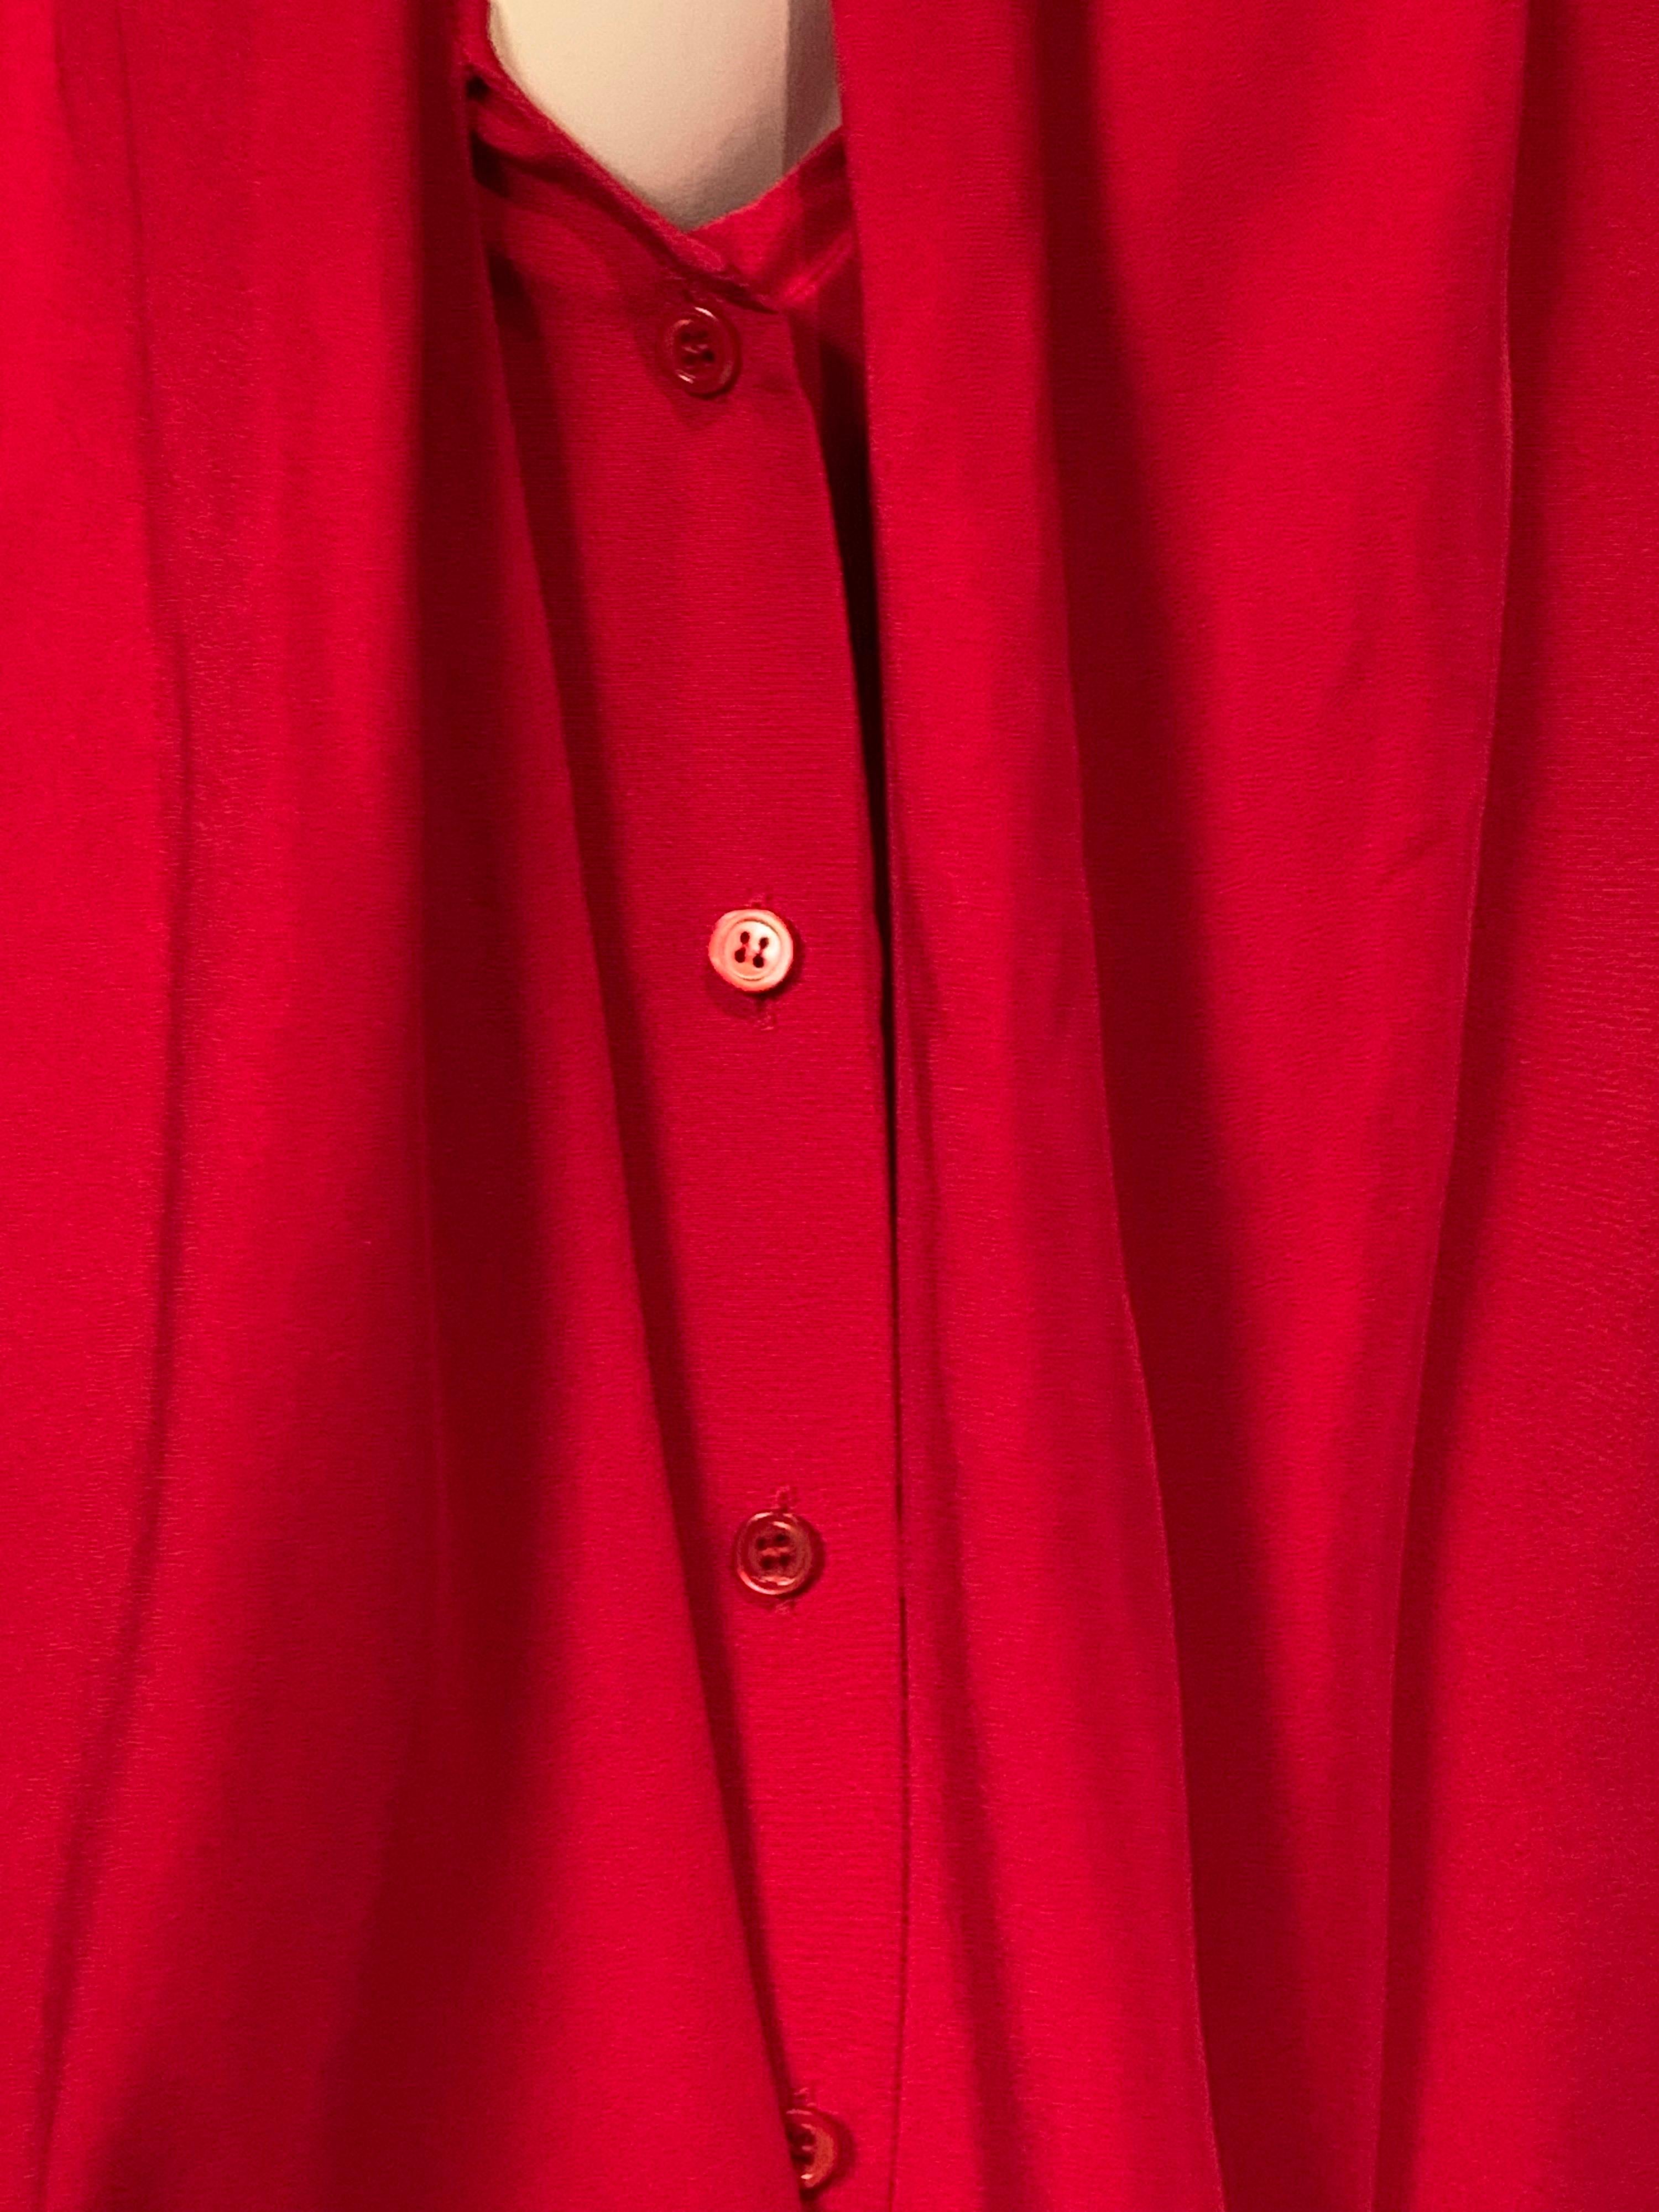 This cheerful red blouse from YSL Rive Gauche is made from a beautiful silk faille.  The blouse has a low neckline with an attached scarf, a button front and two button cuffs.  It is marked a size 40 and it is in excellent condition.
Measurements; 